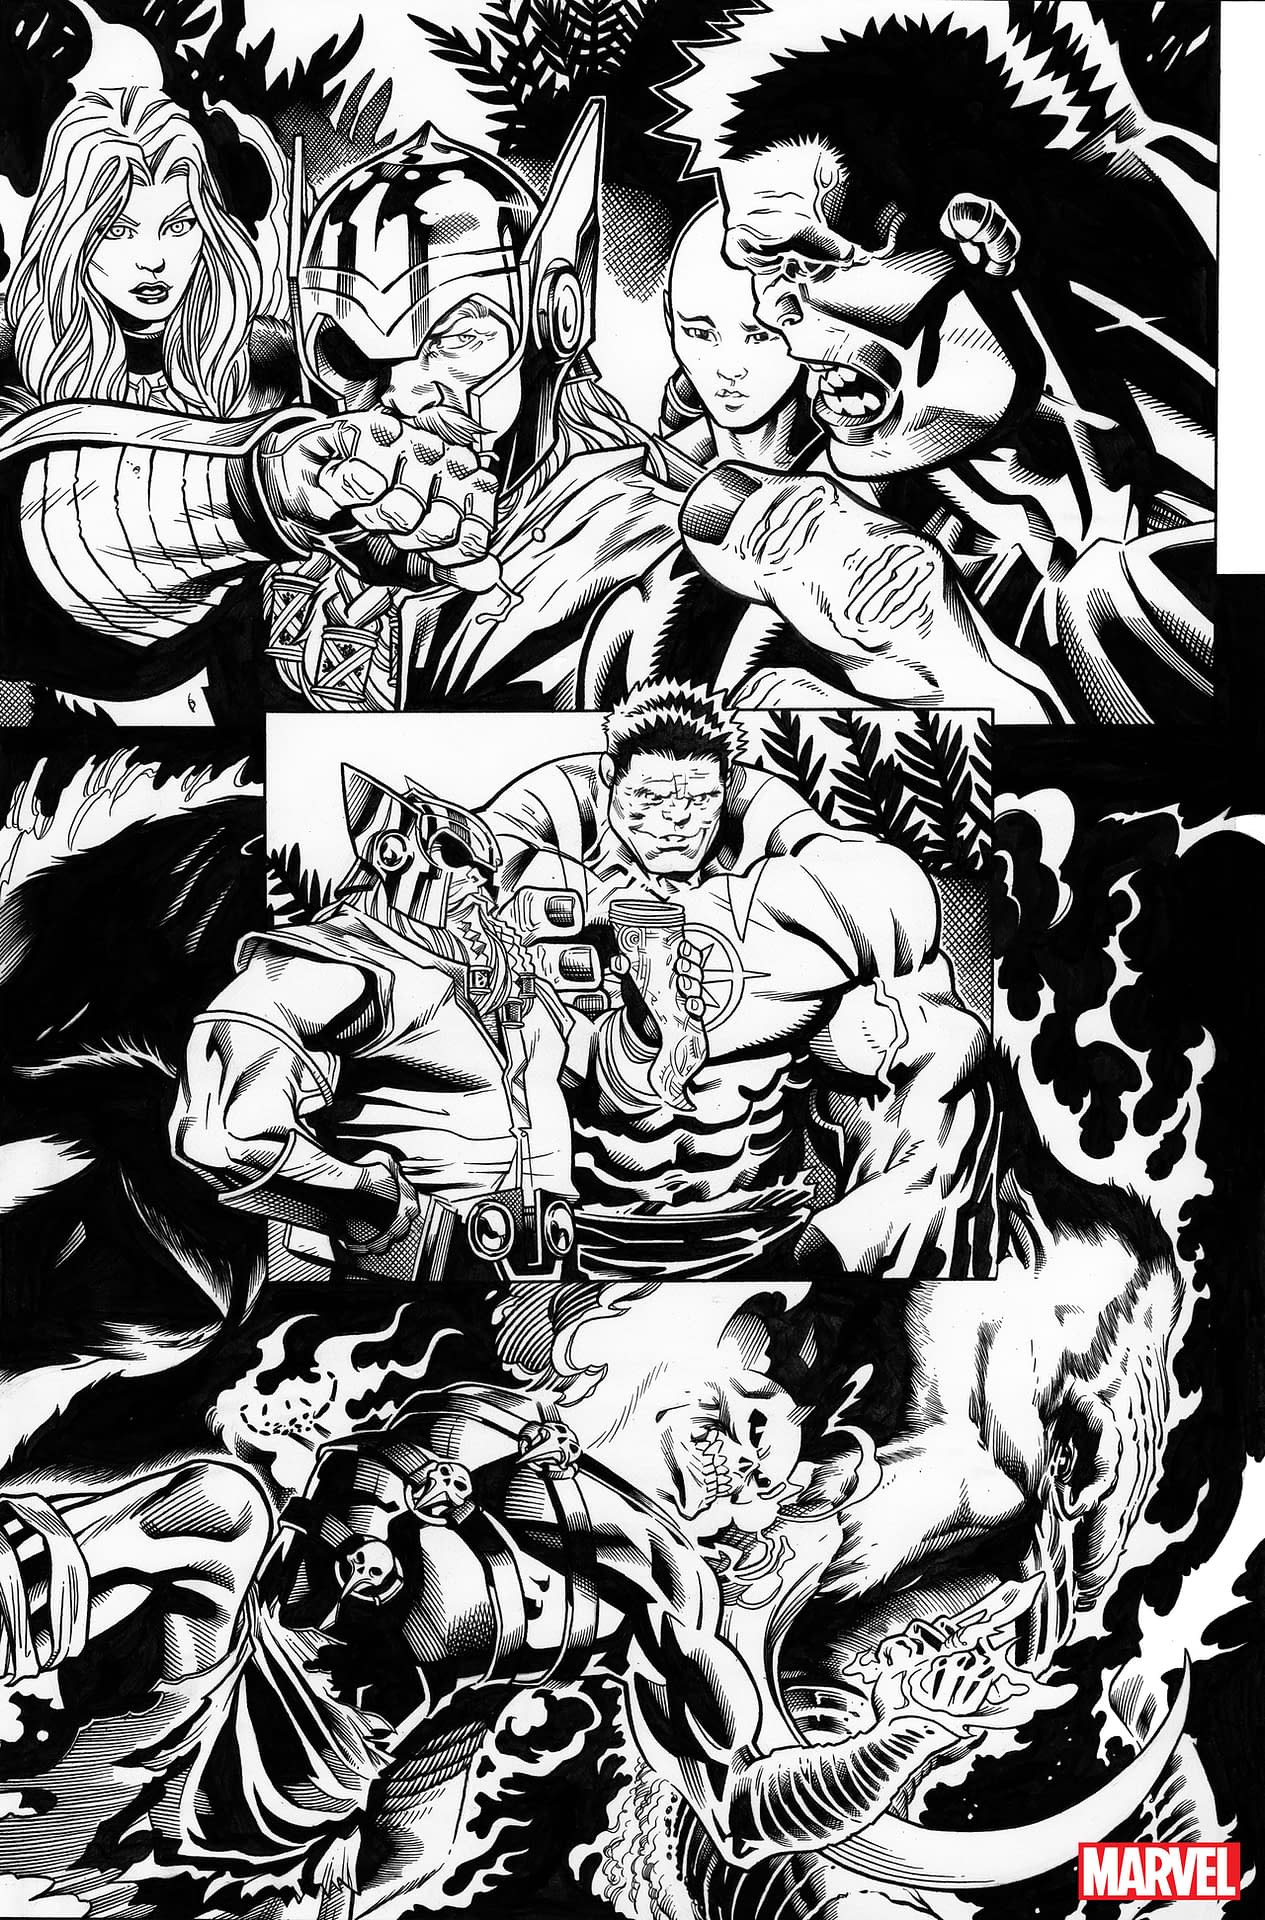 Black Panther Joins a New Avengers #1 by Jason Aaron and Ed McGuinness